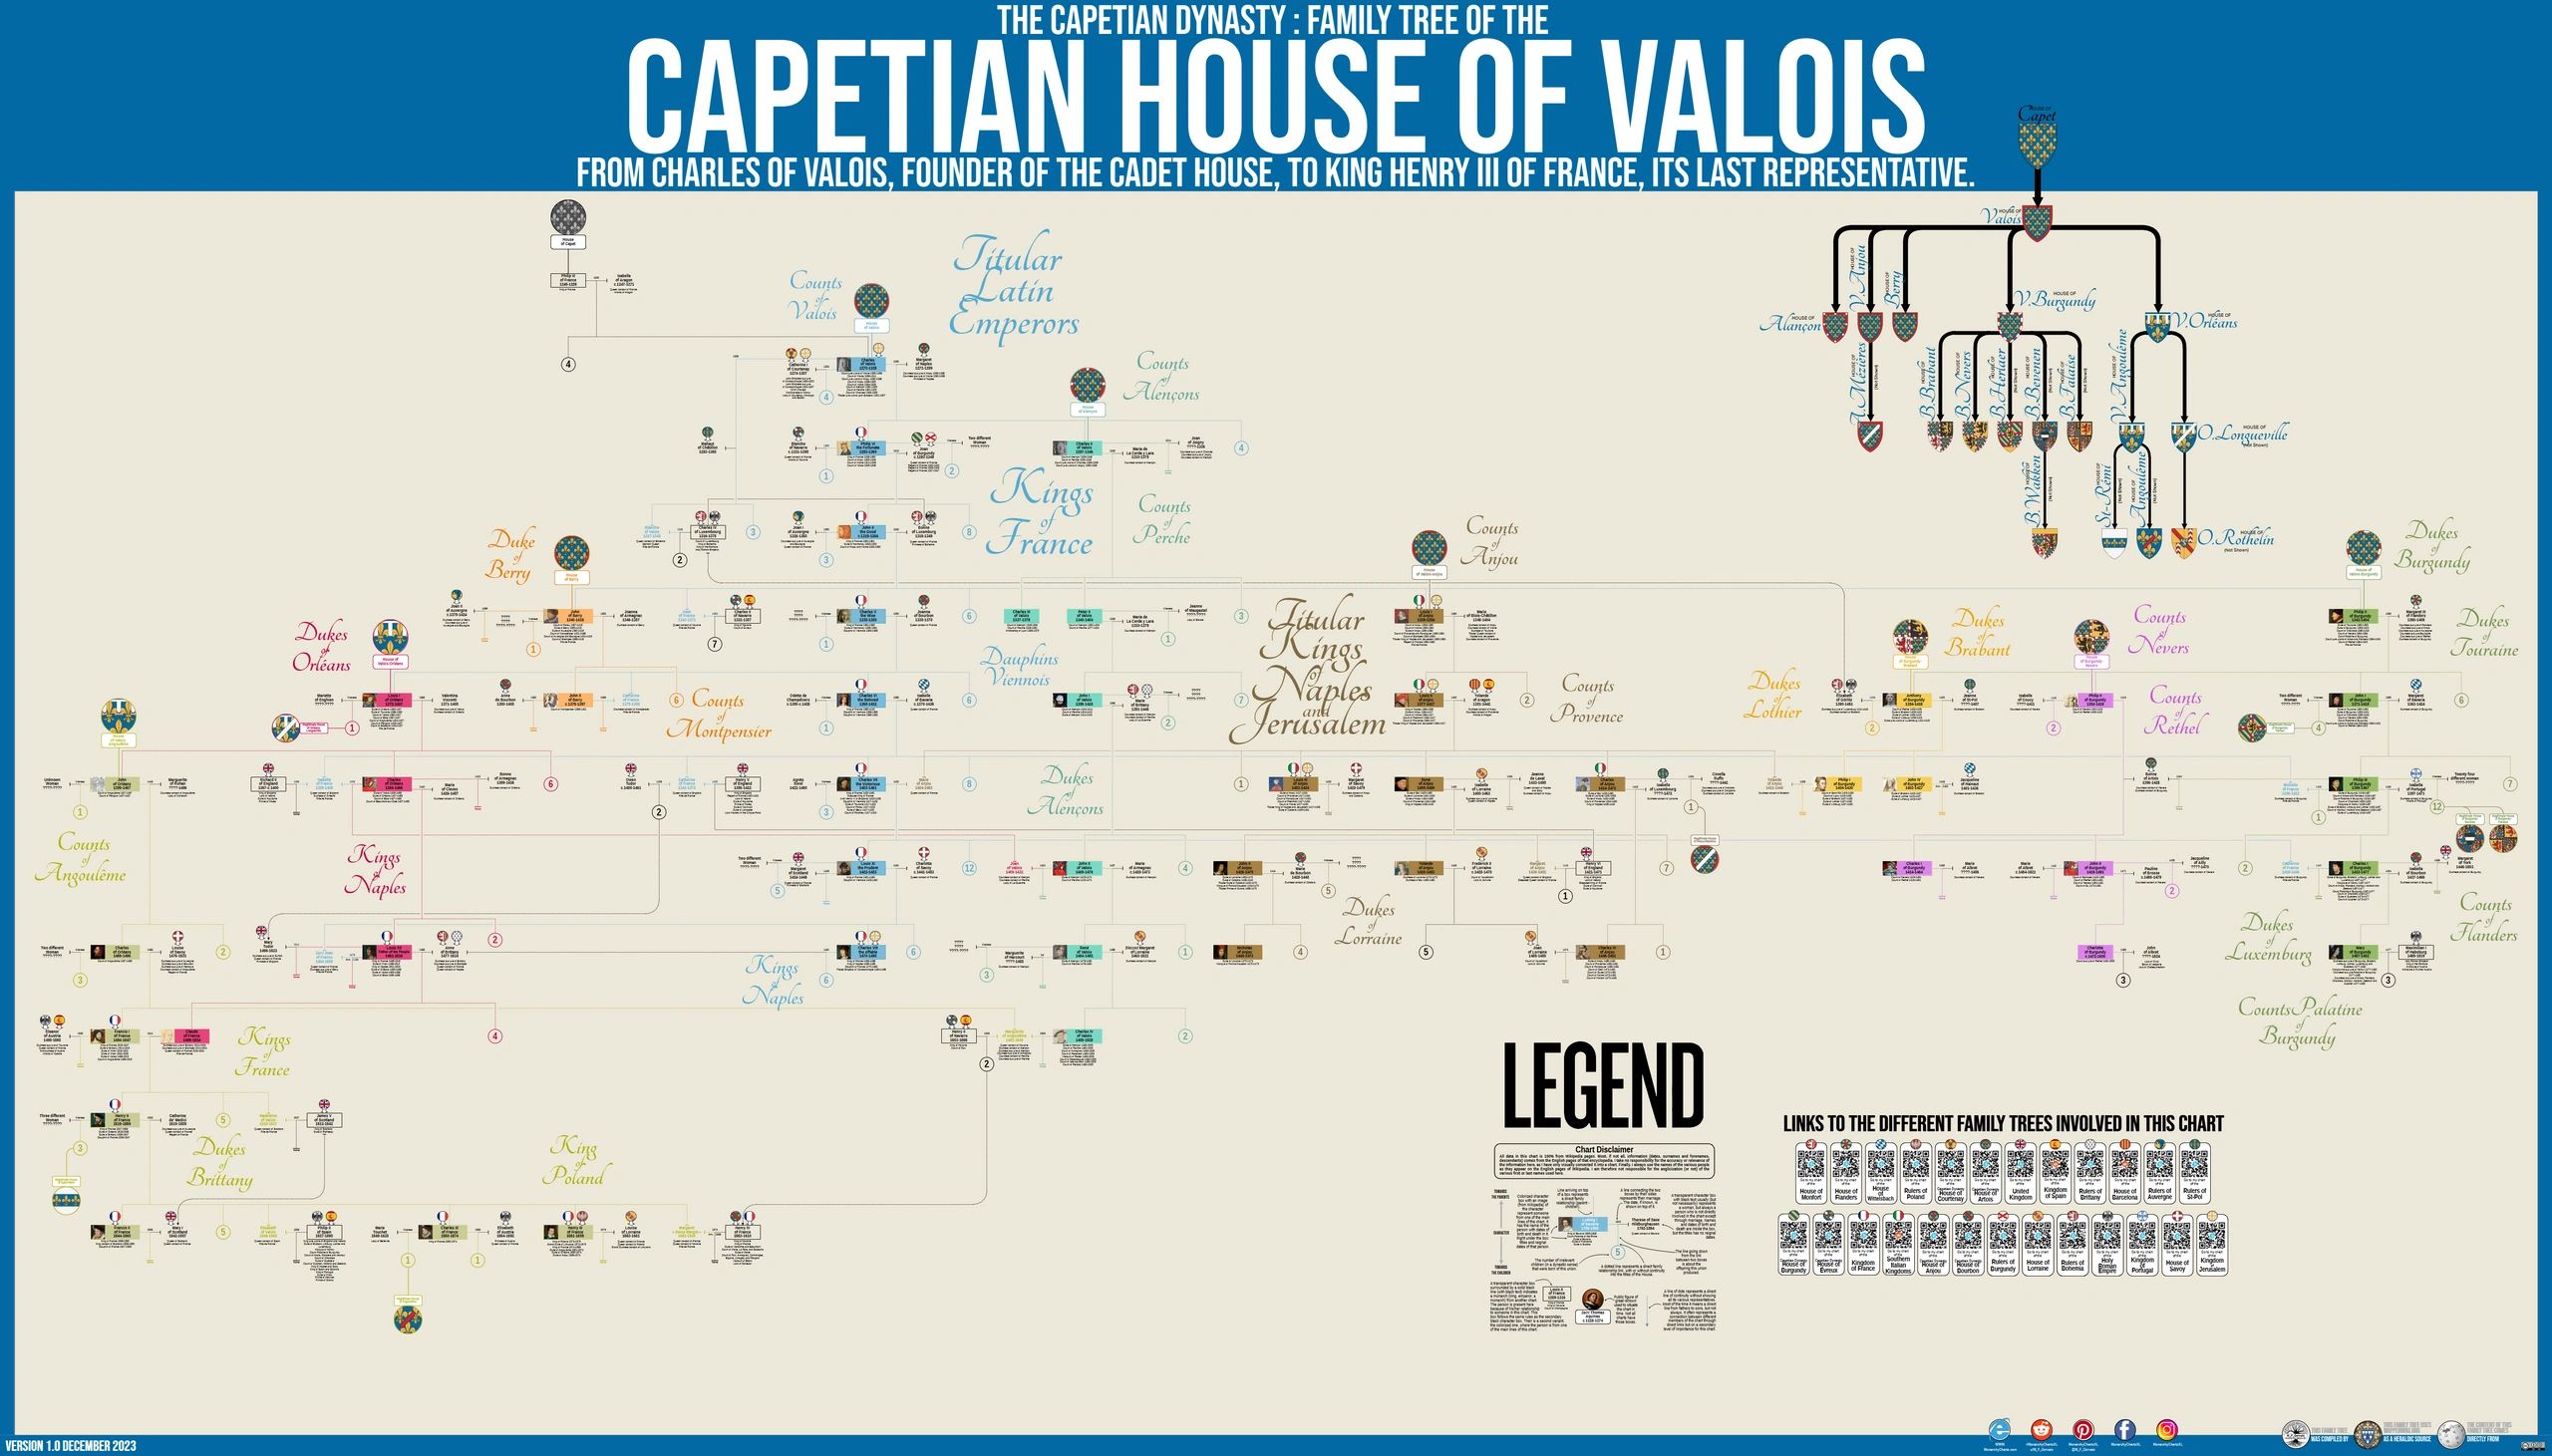 CHART, FAMILY TREE OF THE CAPETIAN DYNASTY: THE HOUSE OF VALOIS.